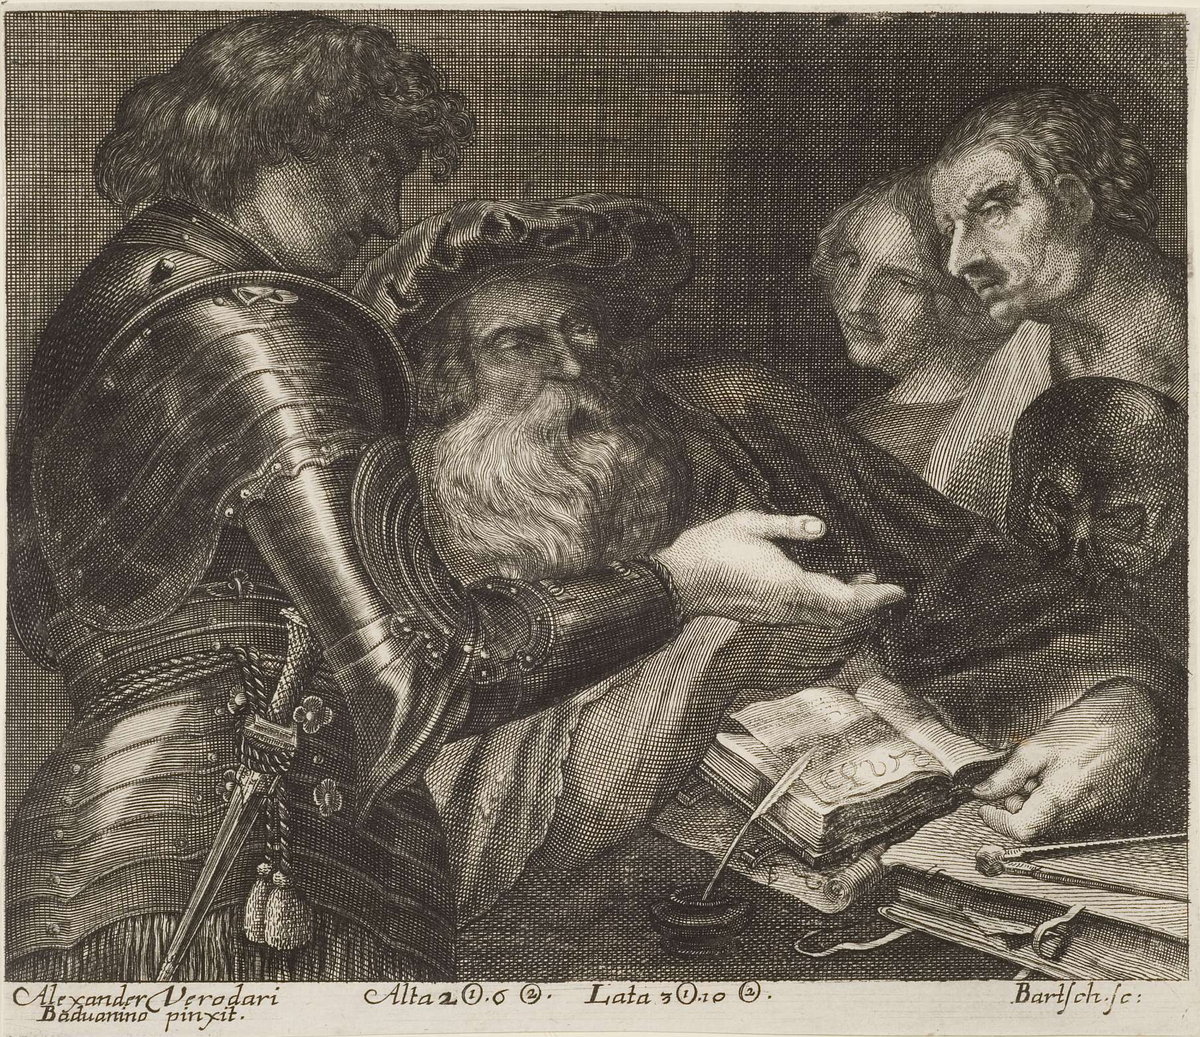 Warrior in armour talks to fortune teller. In the background are two other people and a skull.